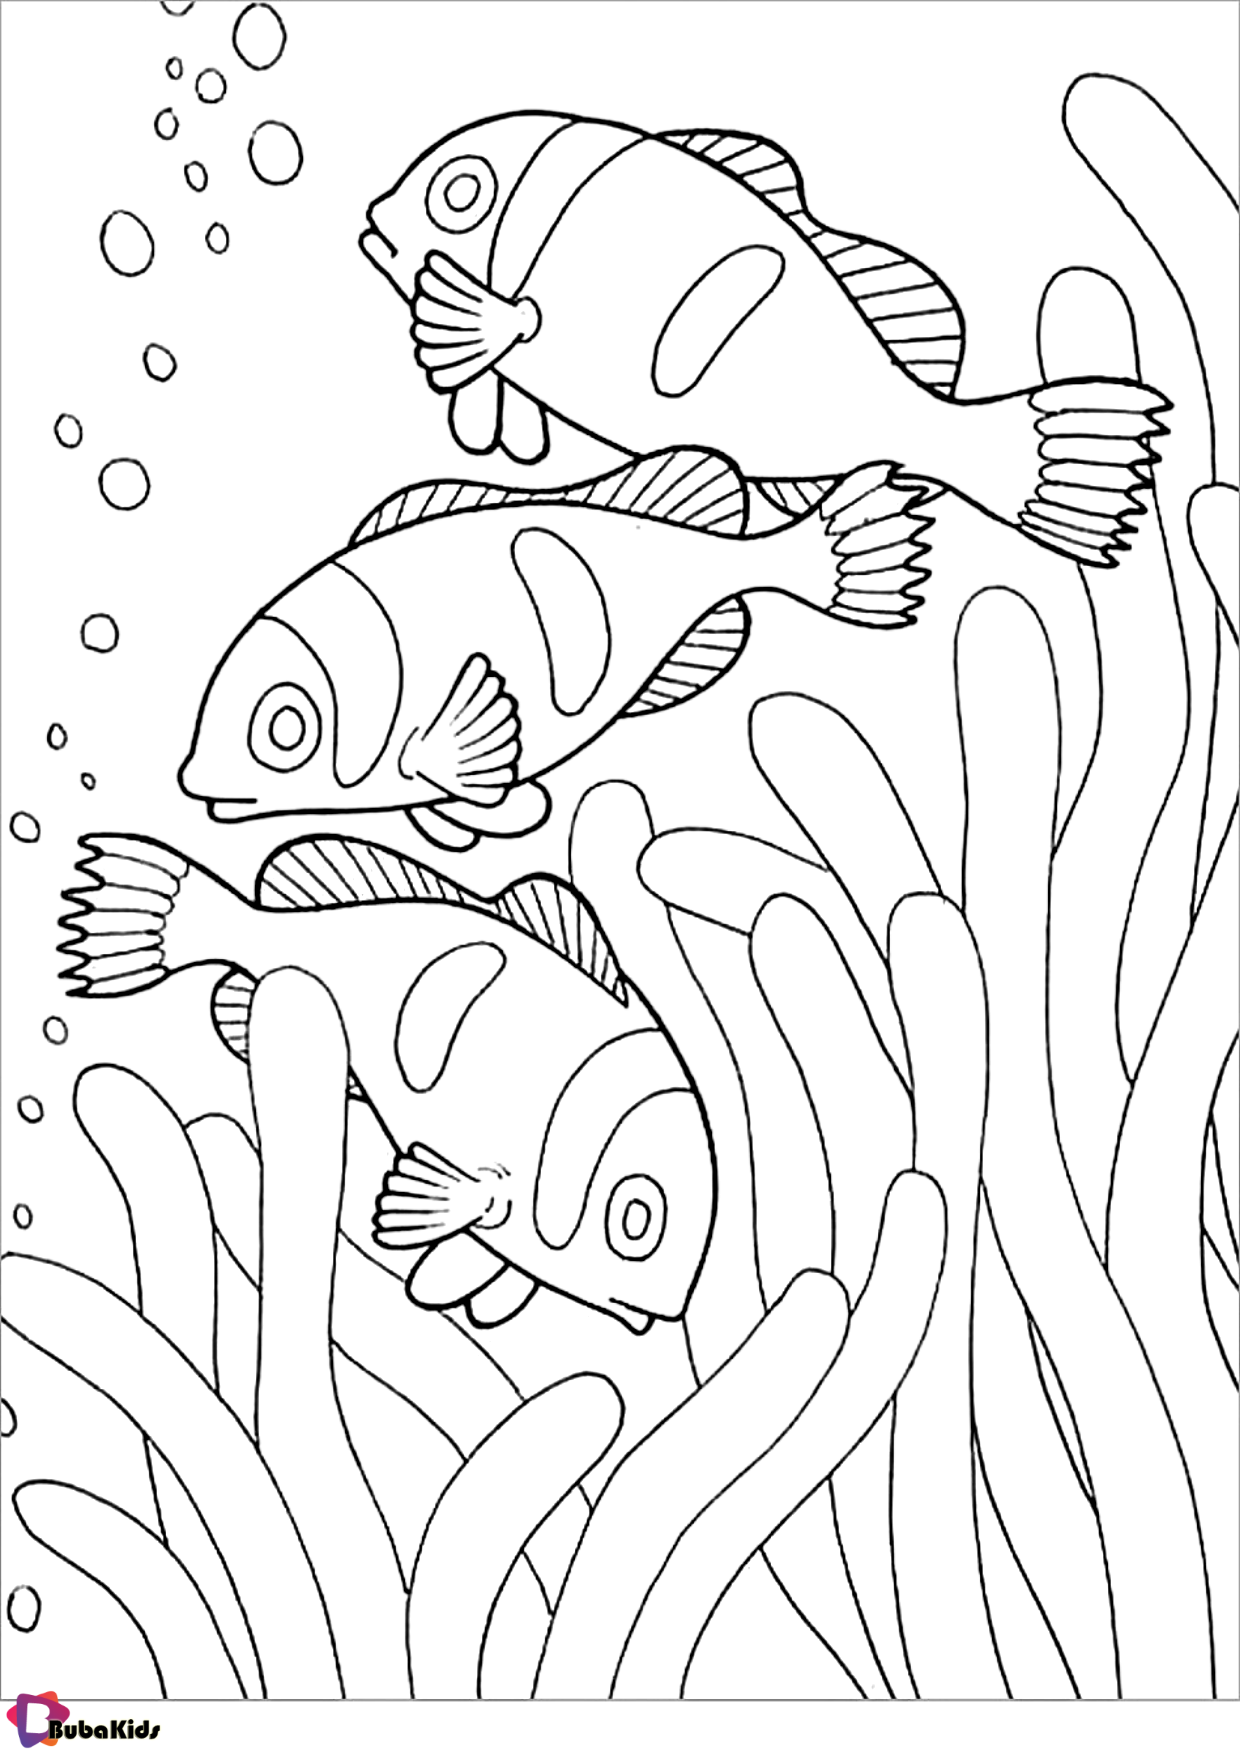 Clown fish and sea weed coloring page